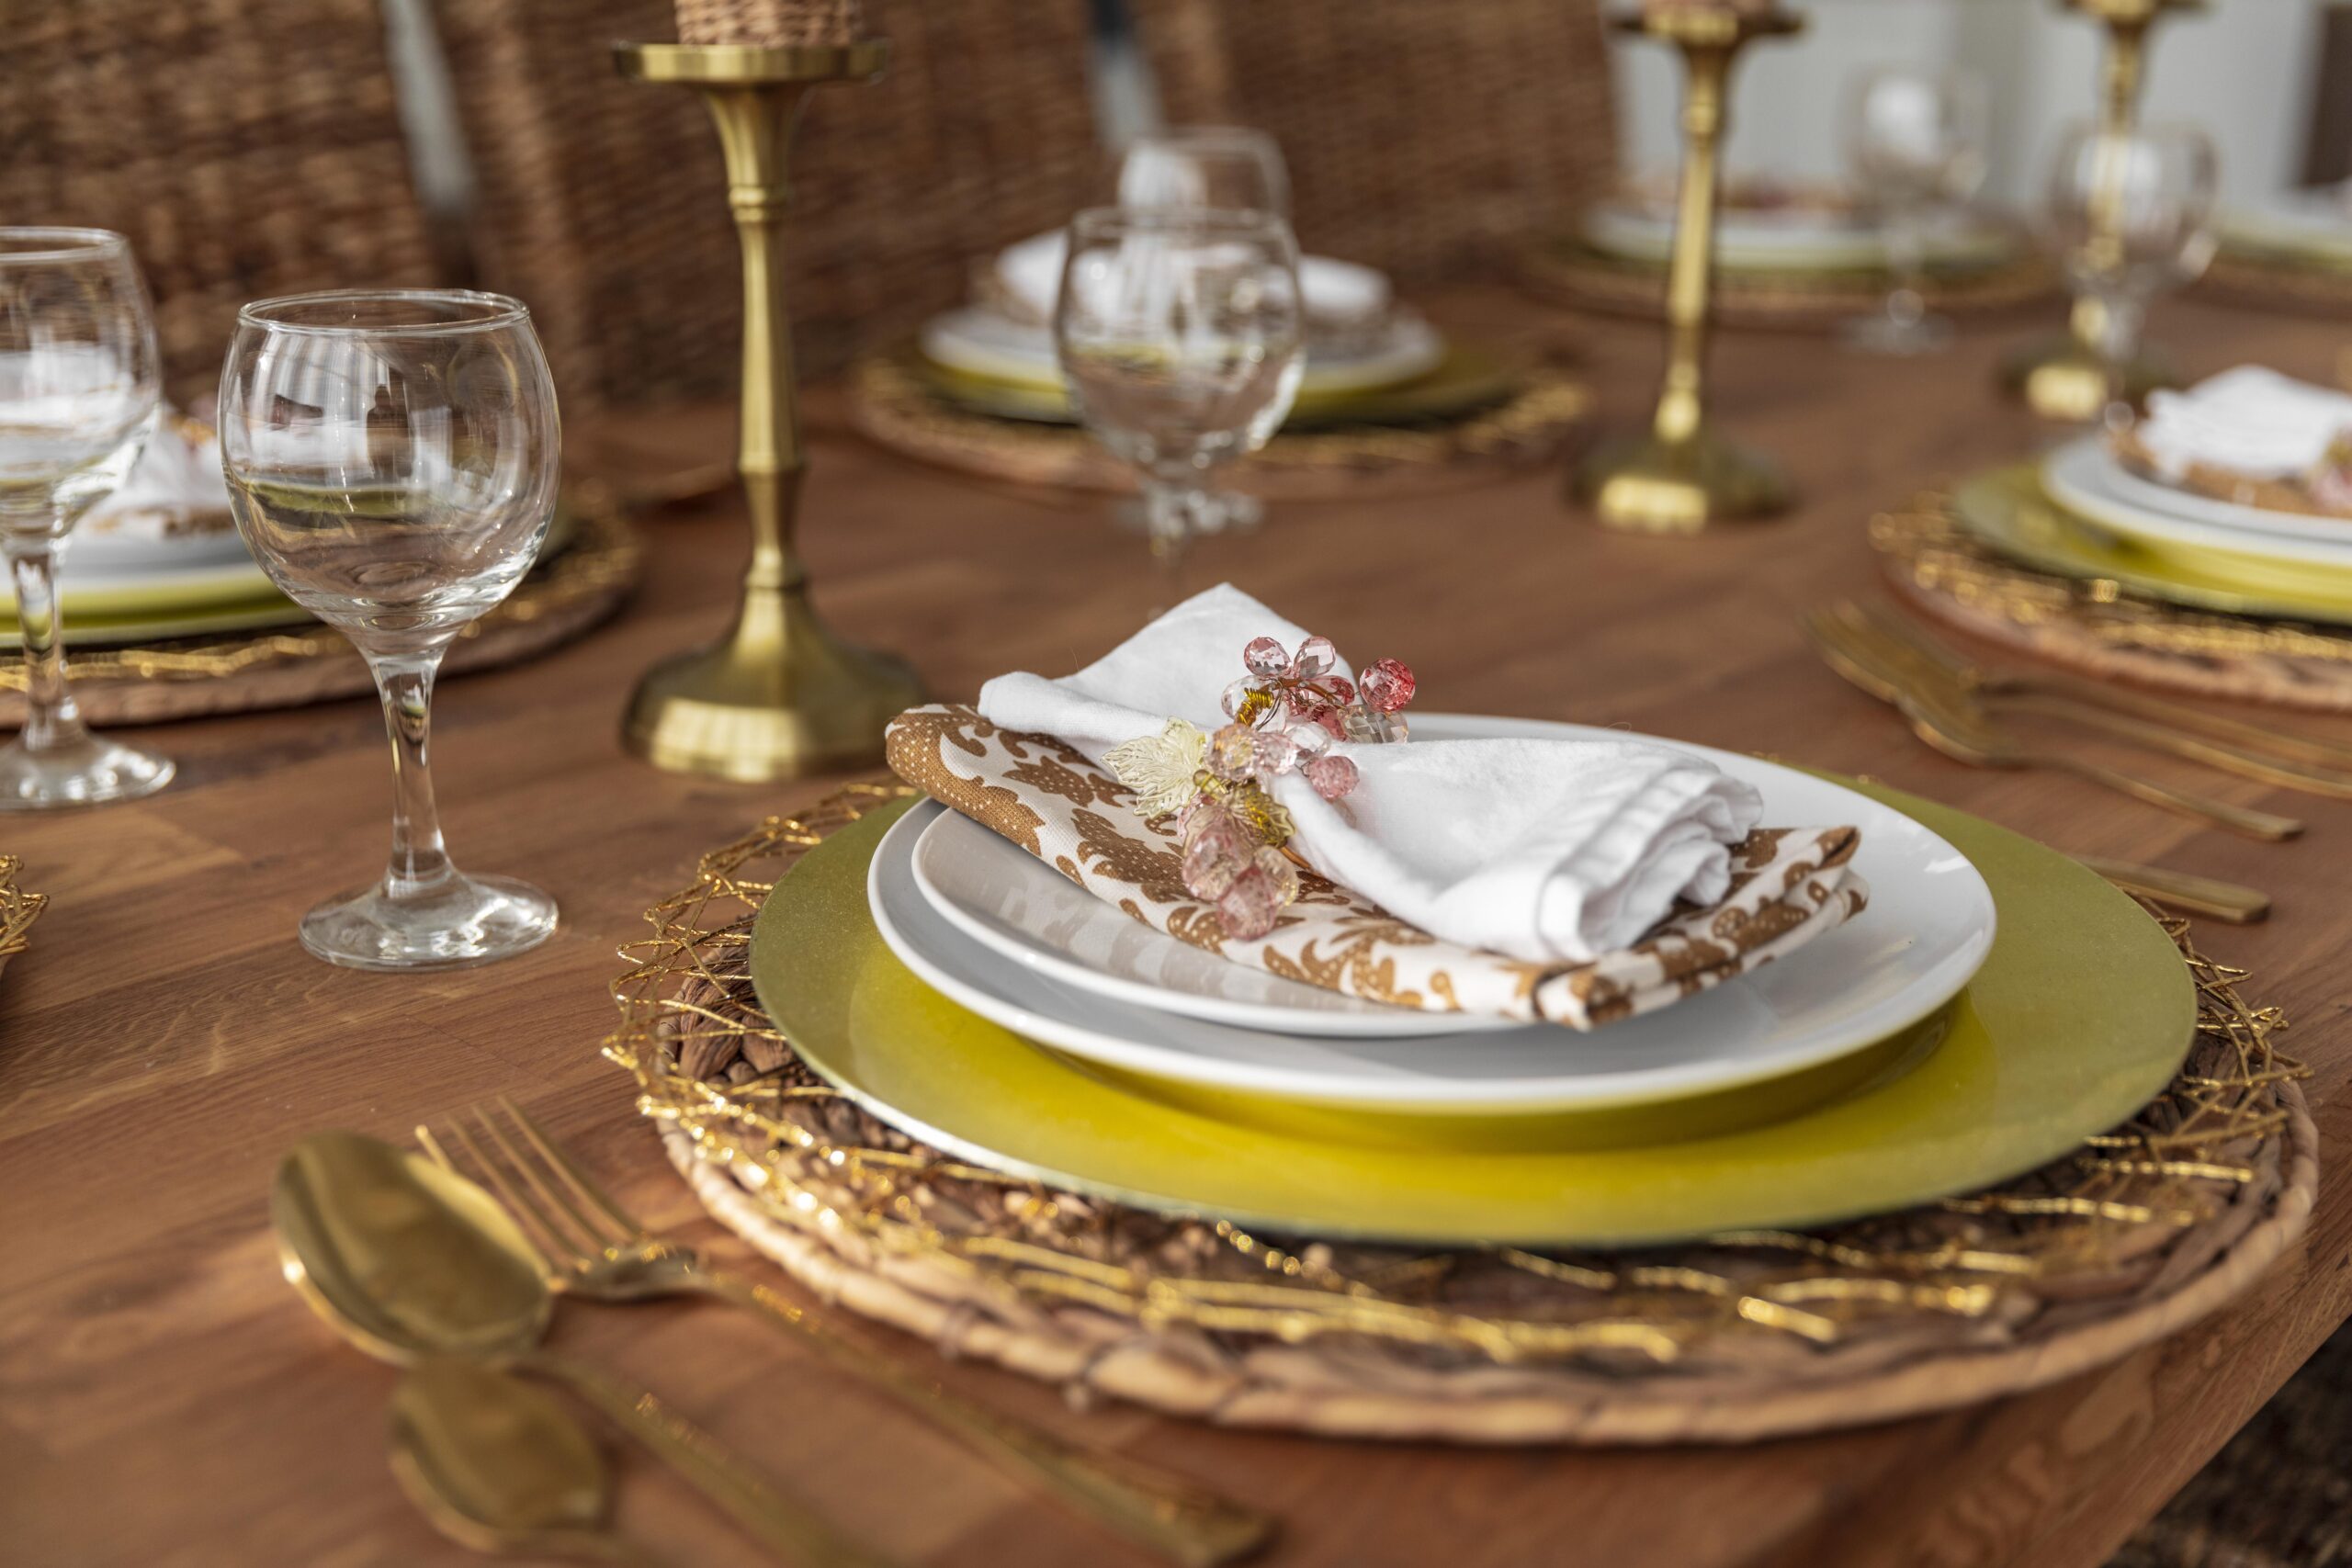 Plates and Napkins Placed in American Style Table Setting